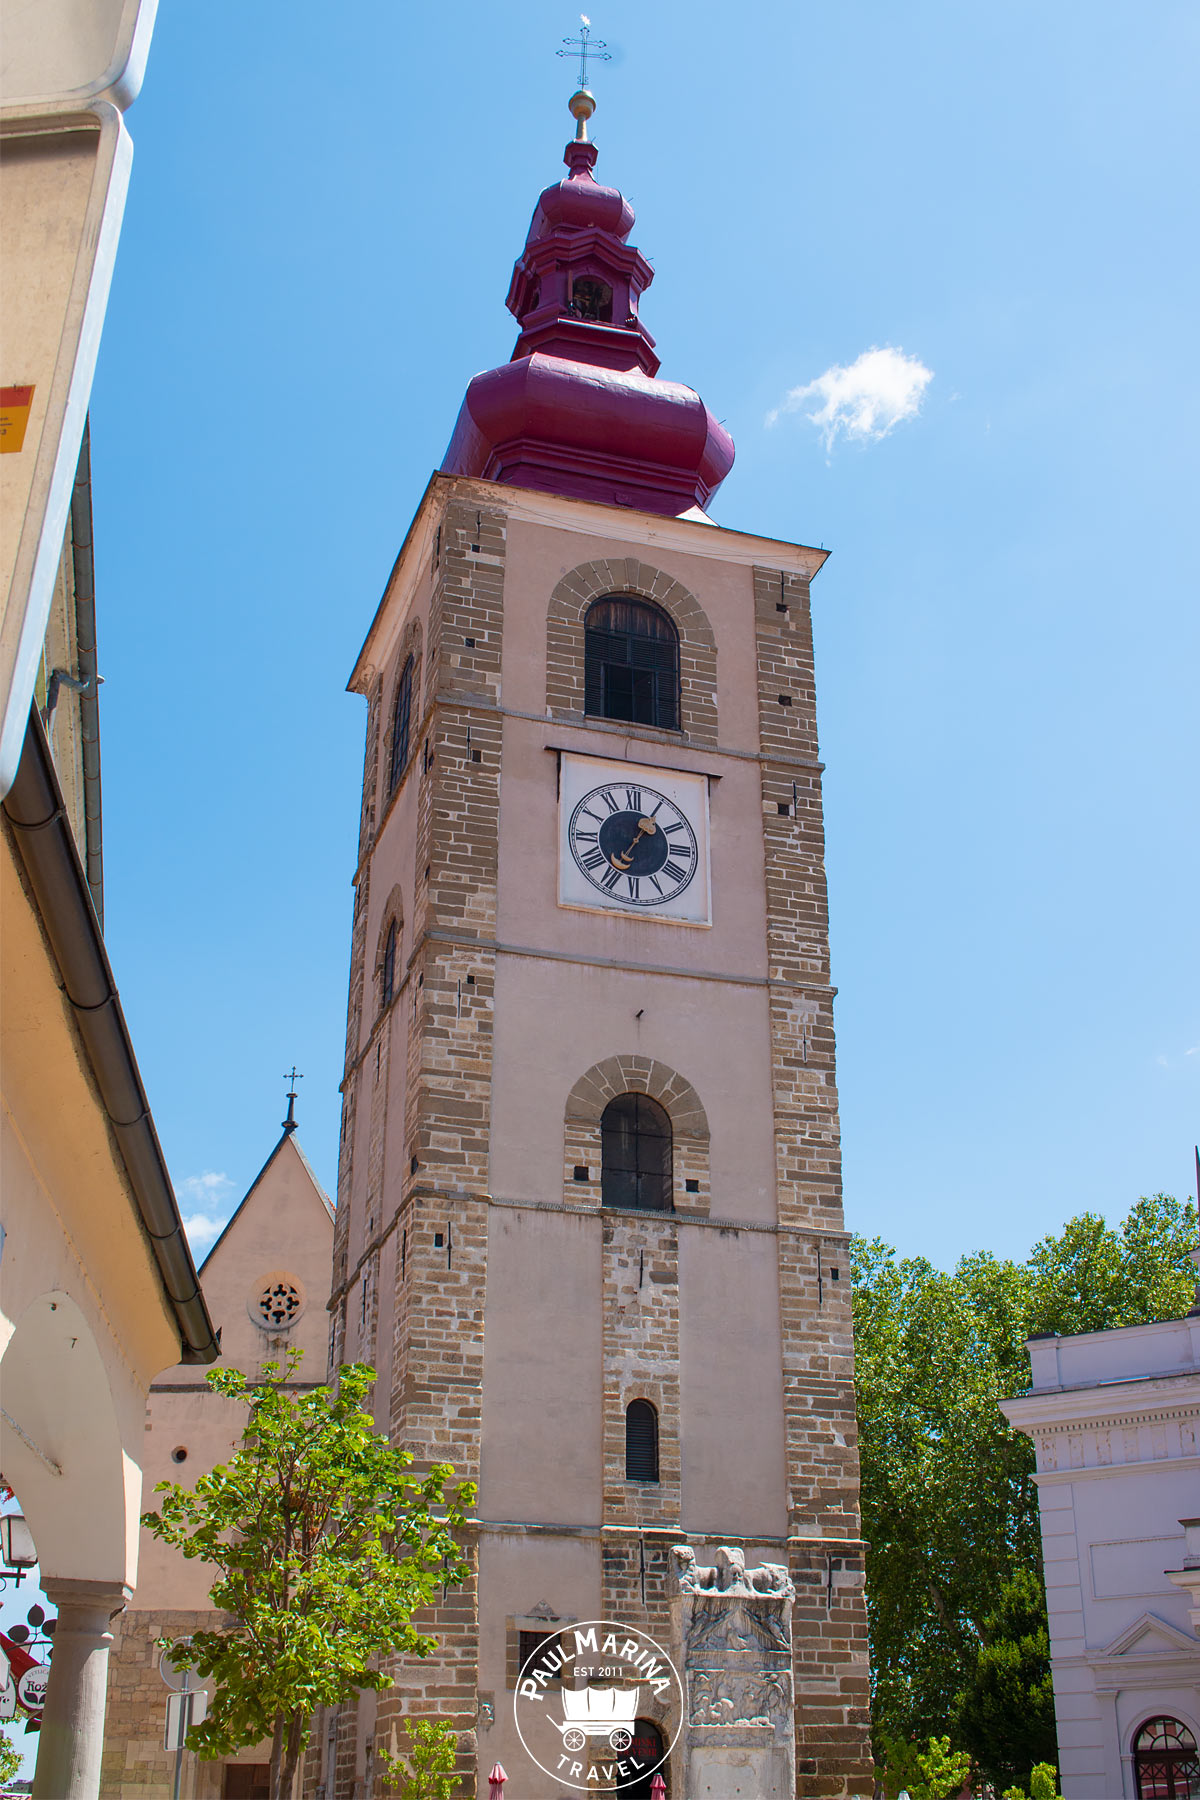 Clock tower of Ptuj with orpheus monument at the bottom